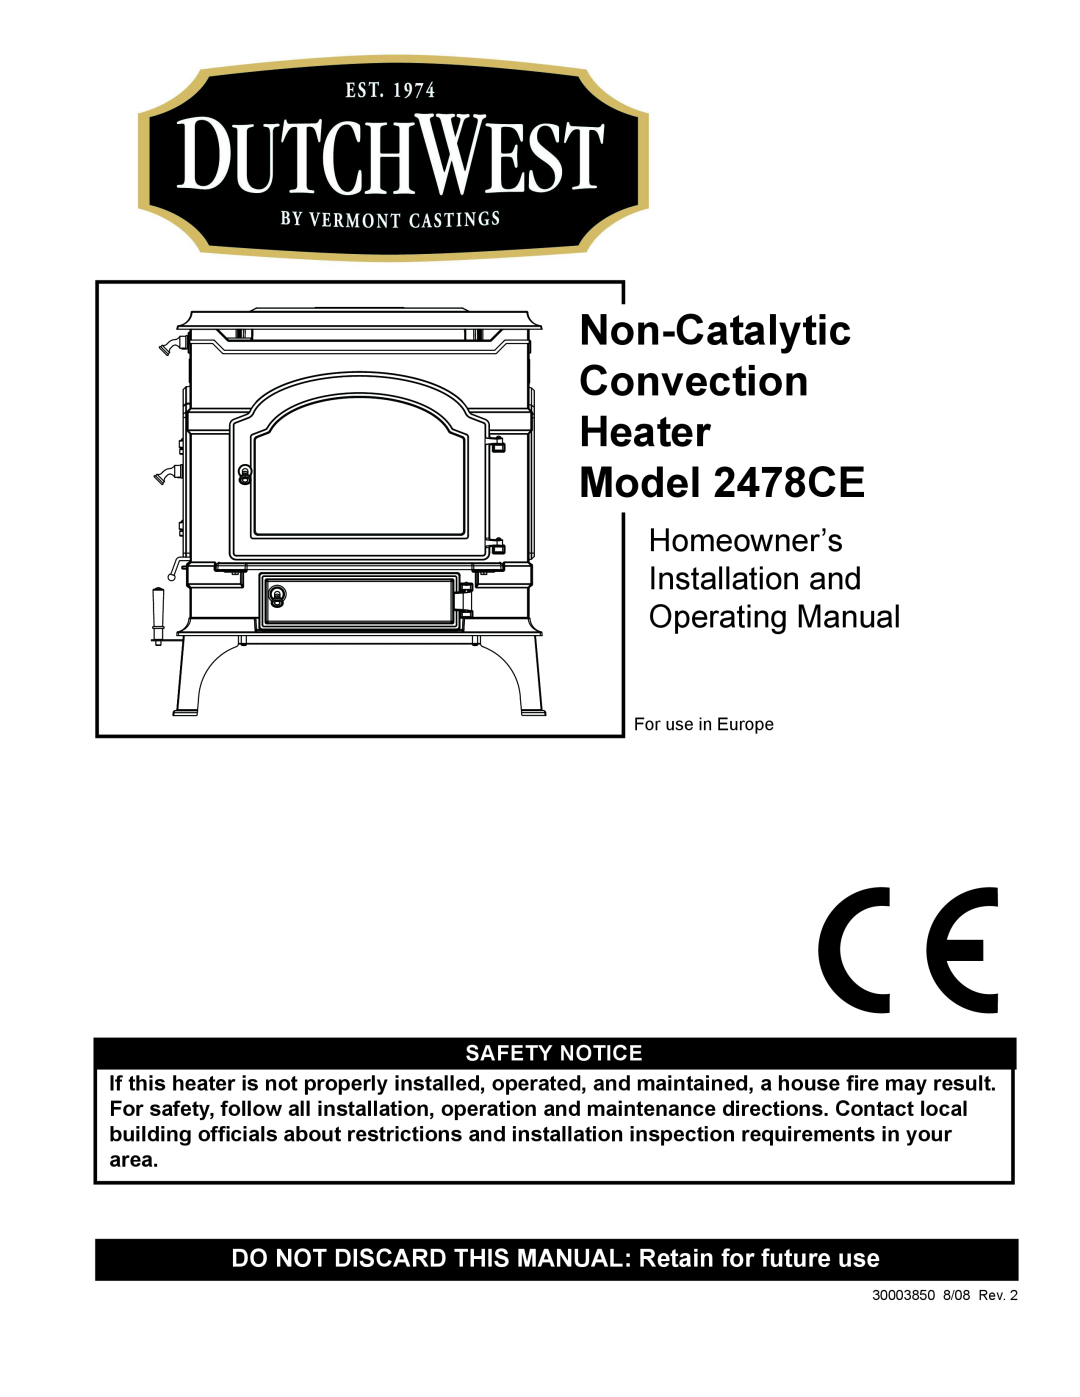 Vermont Casting manual Non-Catalytic Convection Heater Model 2478CE, Safety Notice 